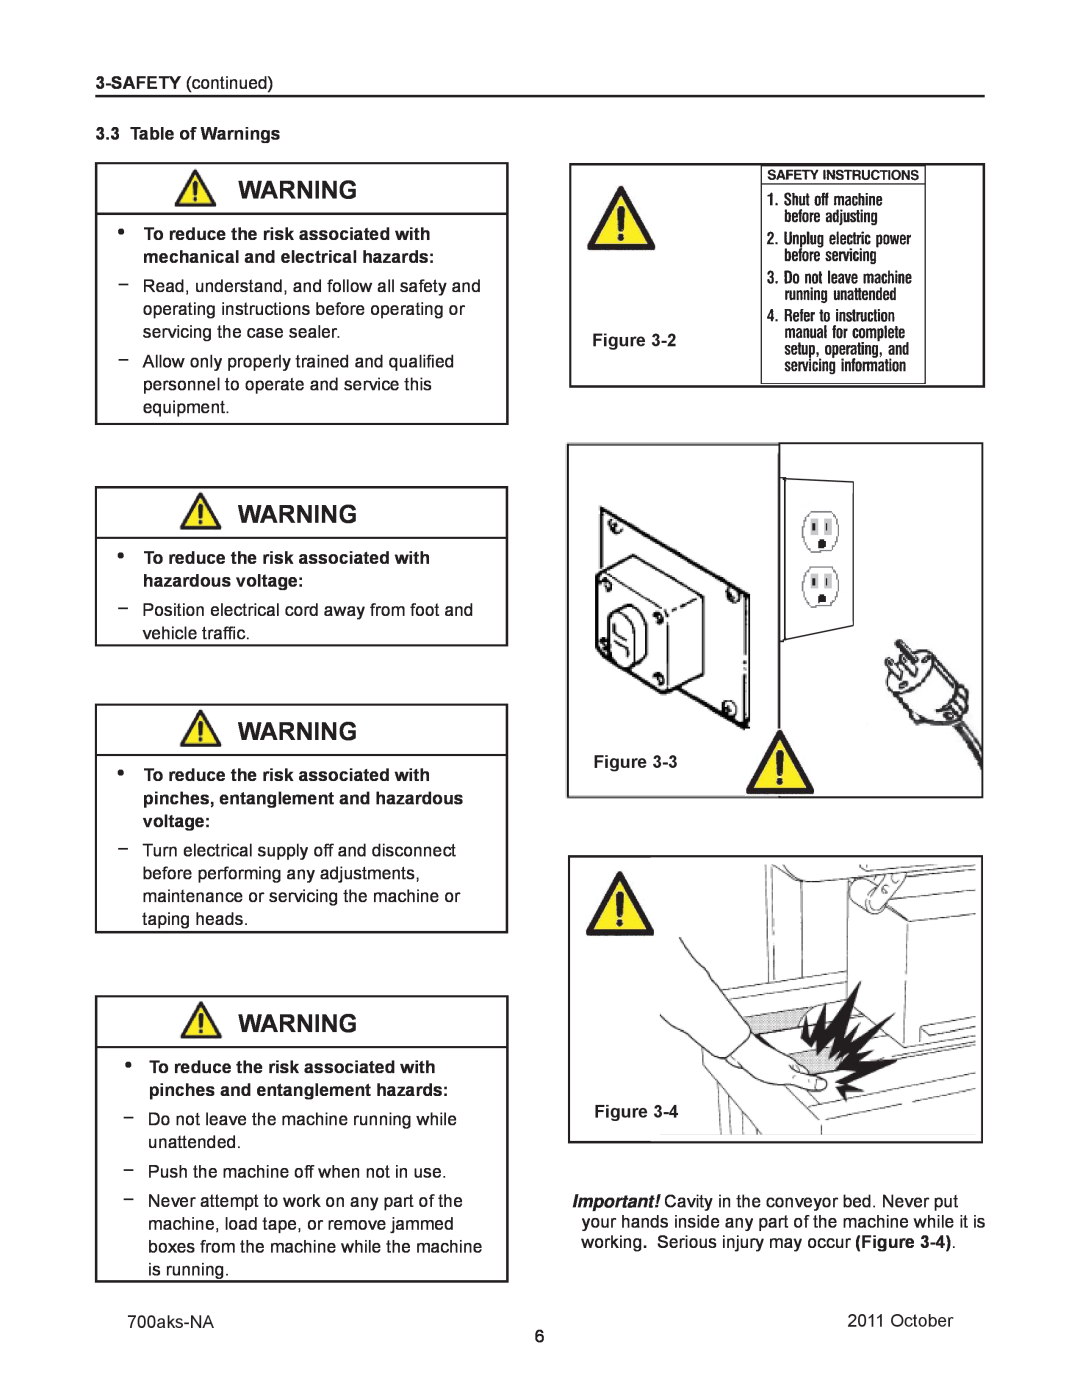 3M 40800 operating instructions Table of Warnings, Figure 